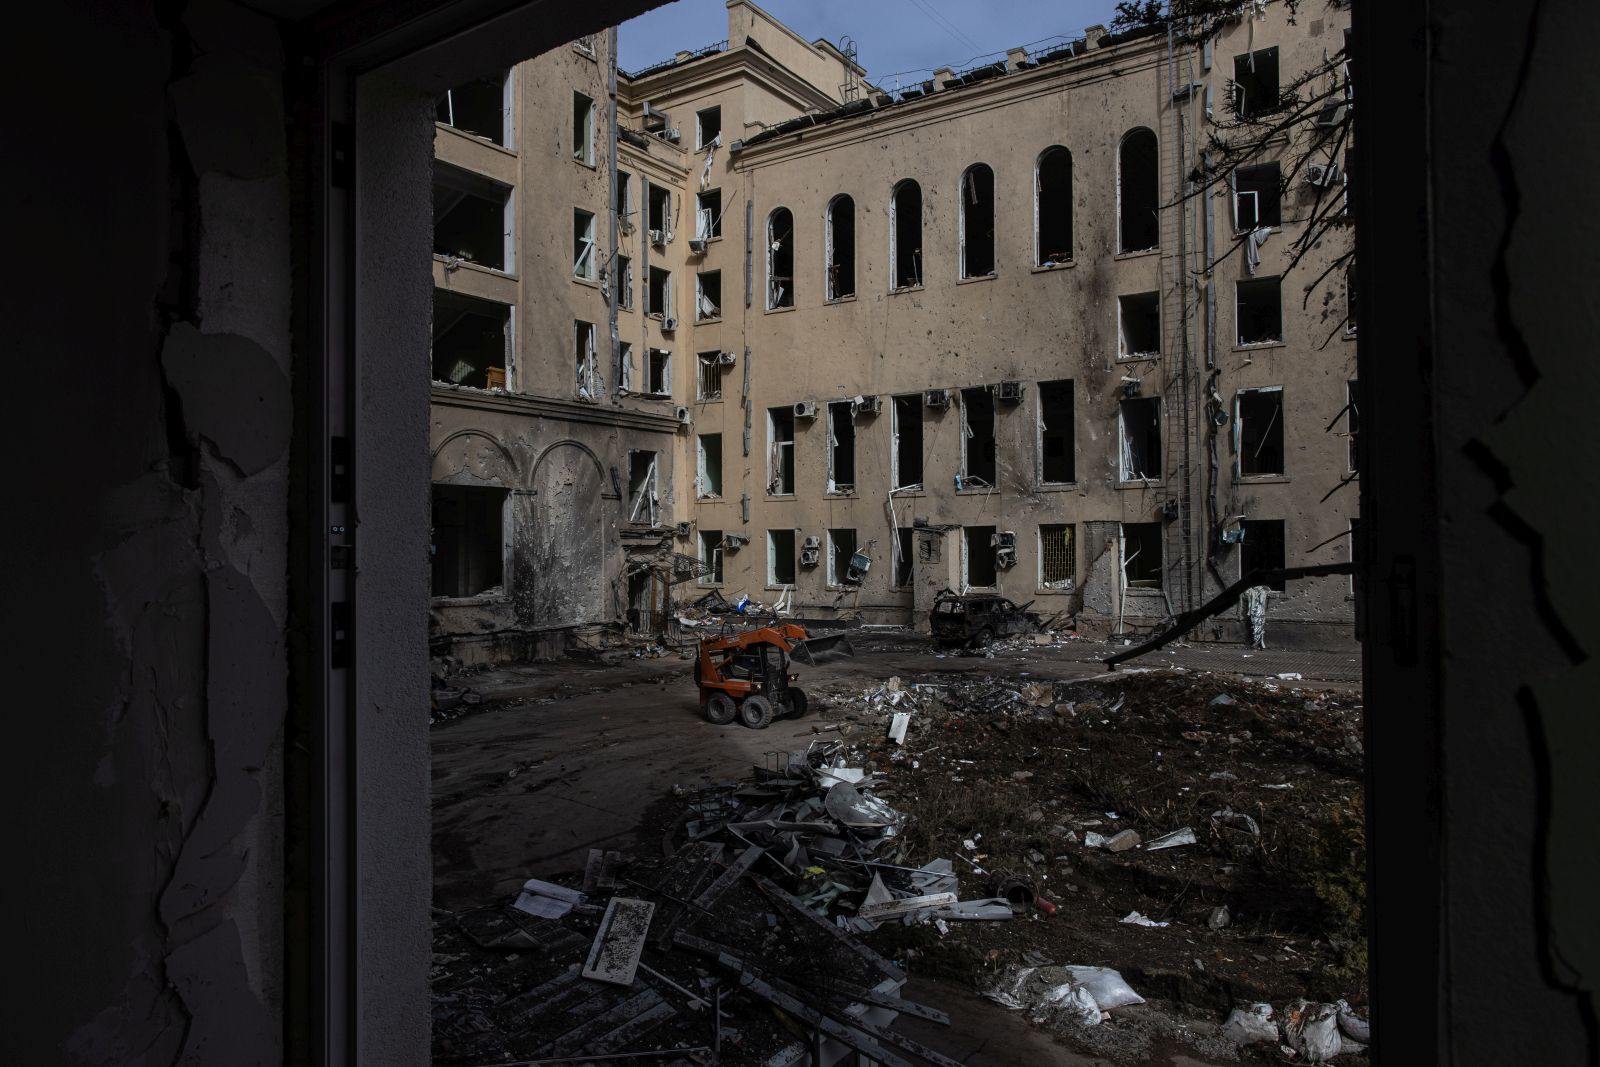 epa09856746 A damaged building of the Kharkiv Regional State Administration, which was heavily shelled by Russian forces, in Kharkiv, northeast Ukraine, 28 March 2022. Kharkiv, Ukraine’s second-largest city of 1.5 million people, which lies about 25 miles from the Russian border, has been heavily shelled by Russian forces over the past weeks, with many civilians killed in the city.  EPA/ROMAN PILIPEY